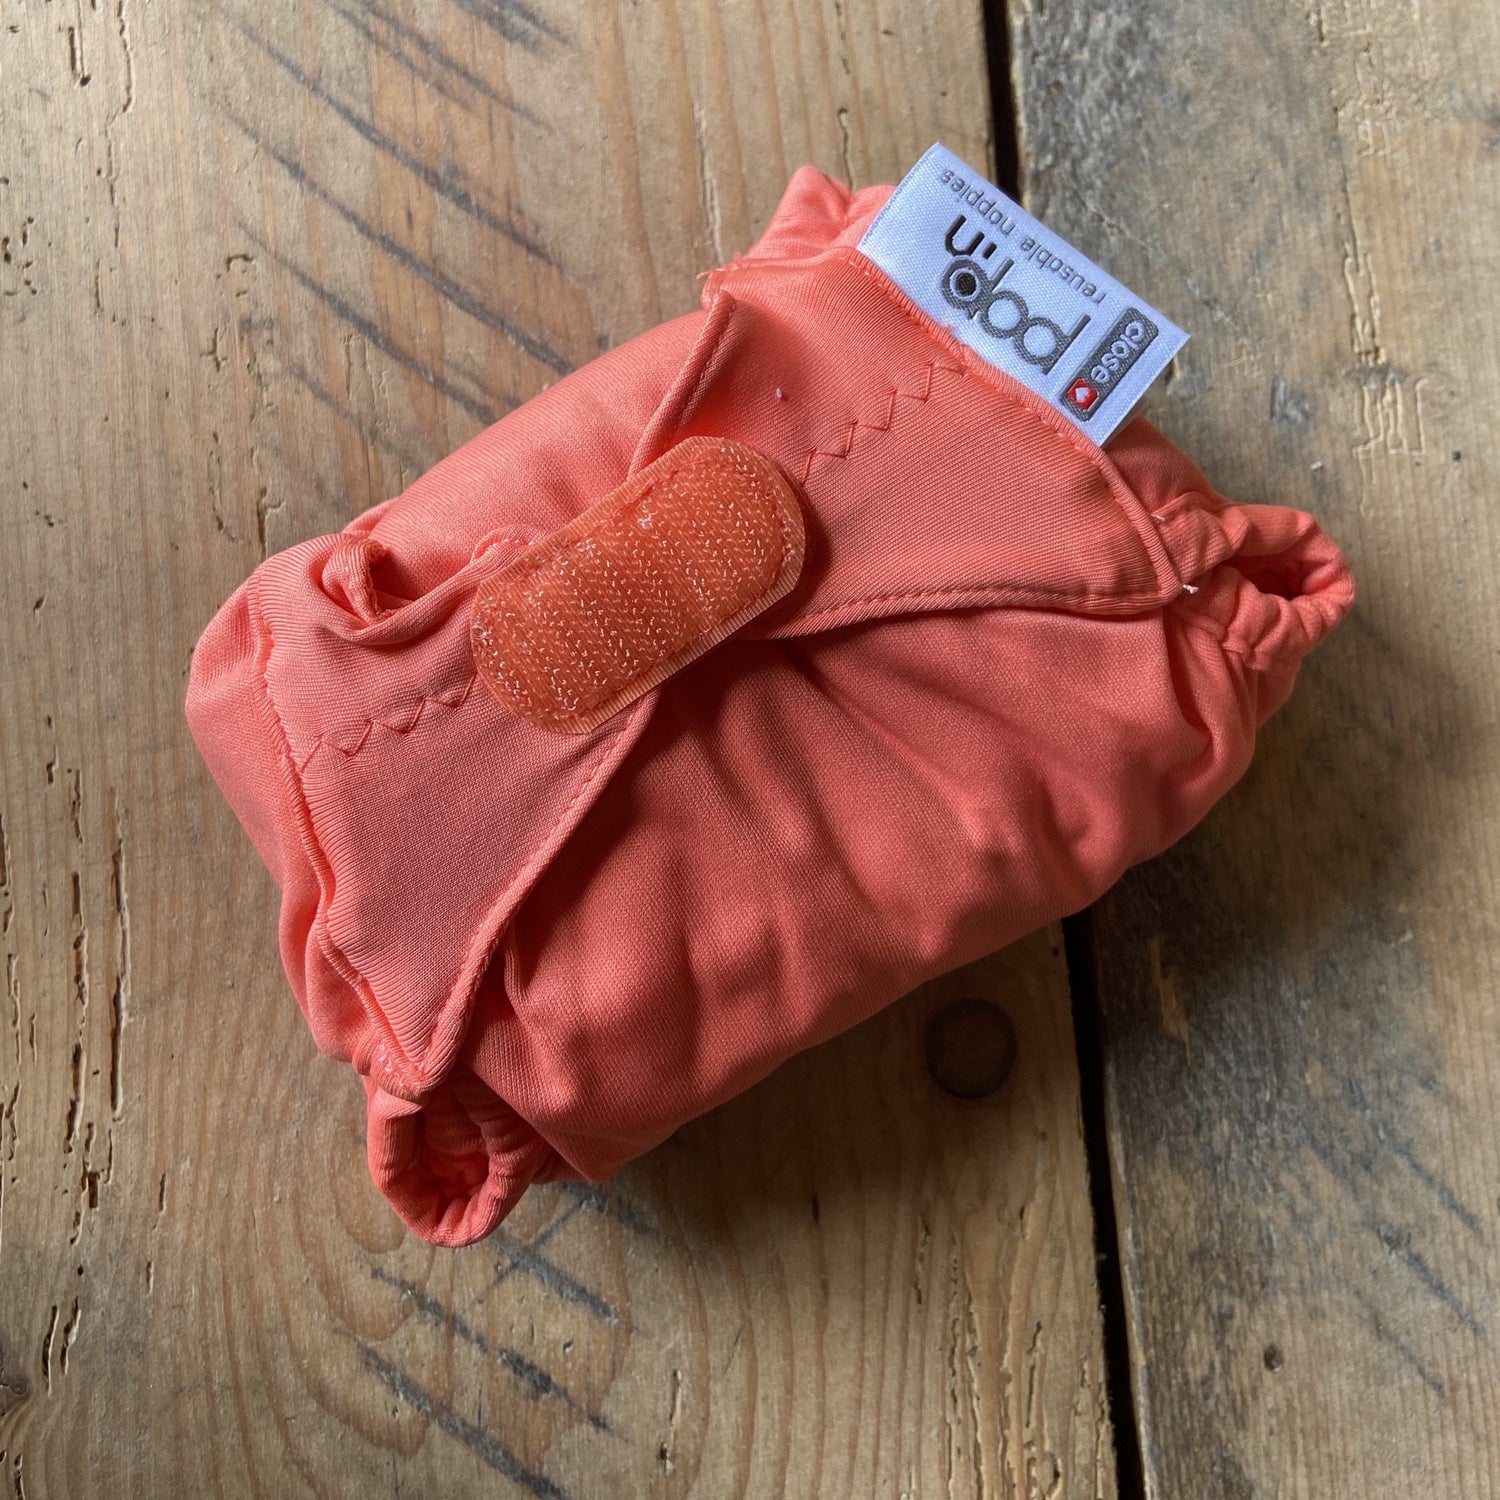 cloth nappy close pop in plain reusable nappies coral